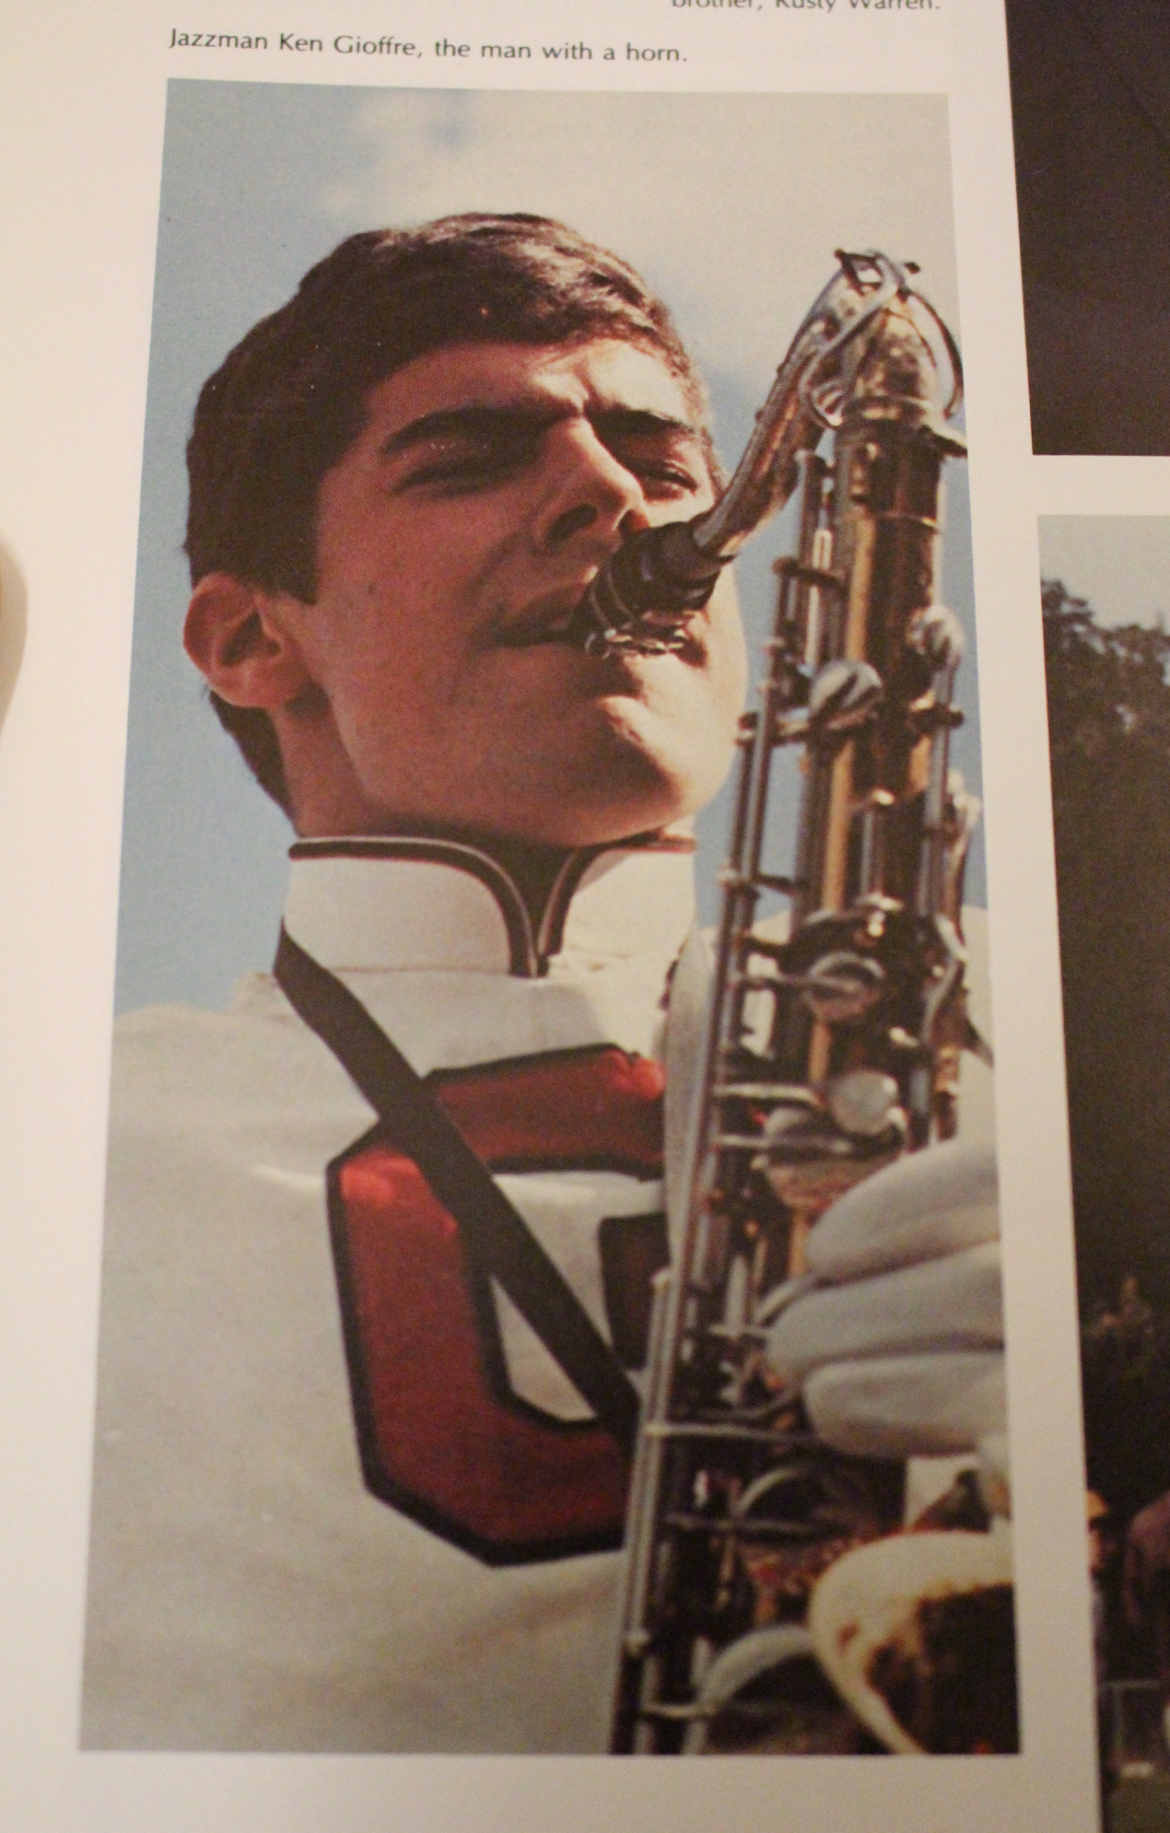 '83 Ken Gioffre marching band